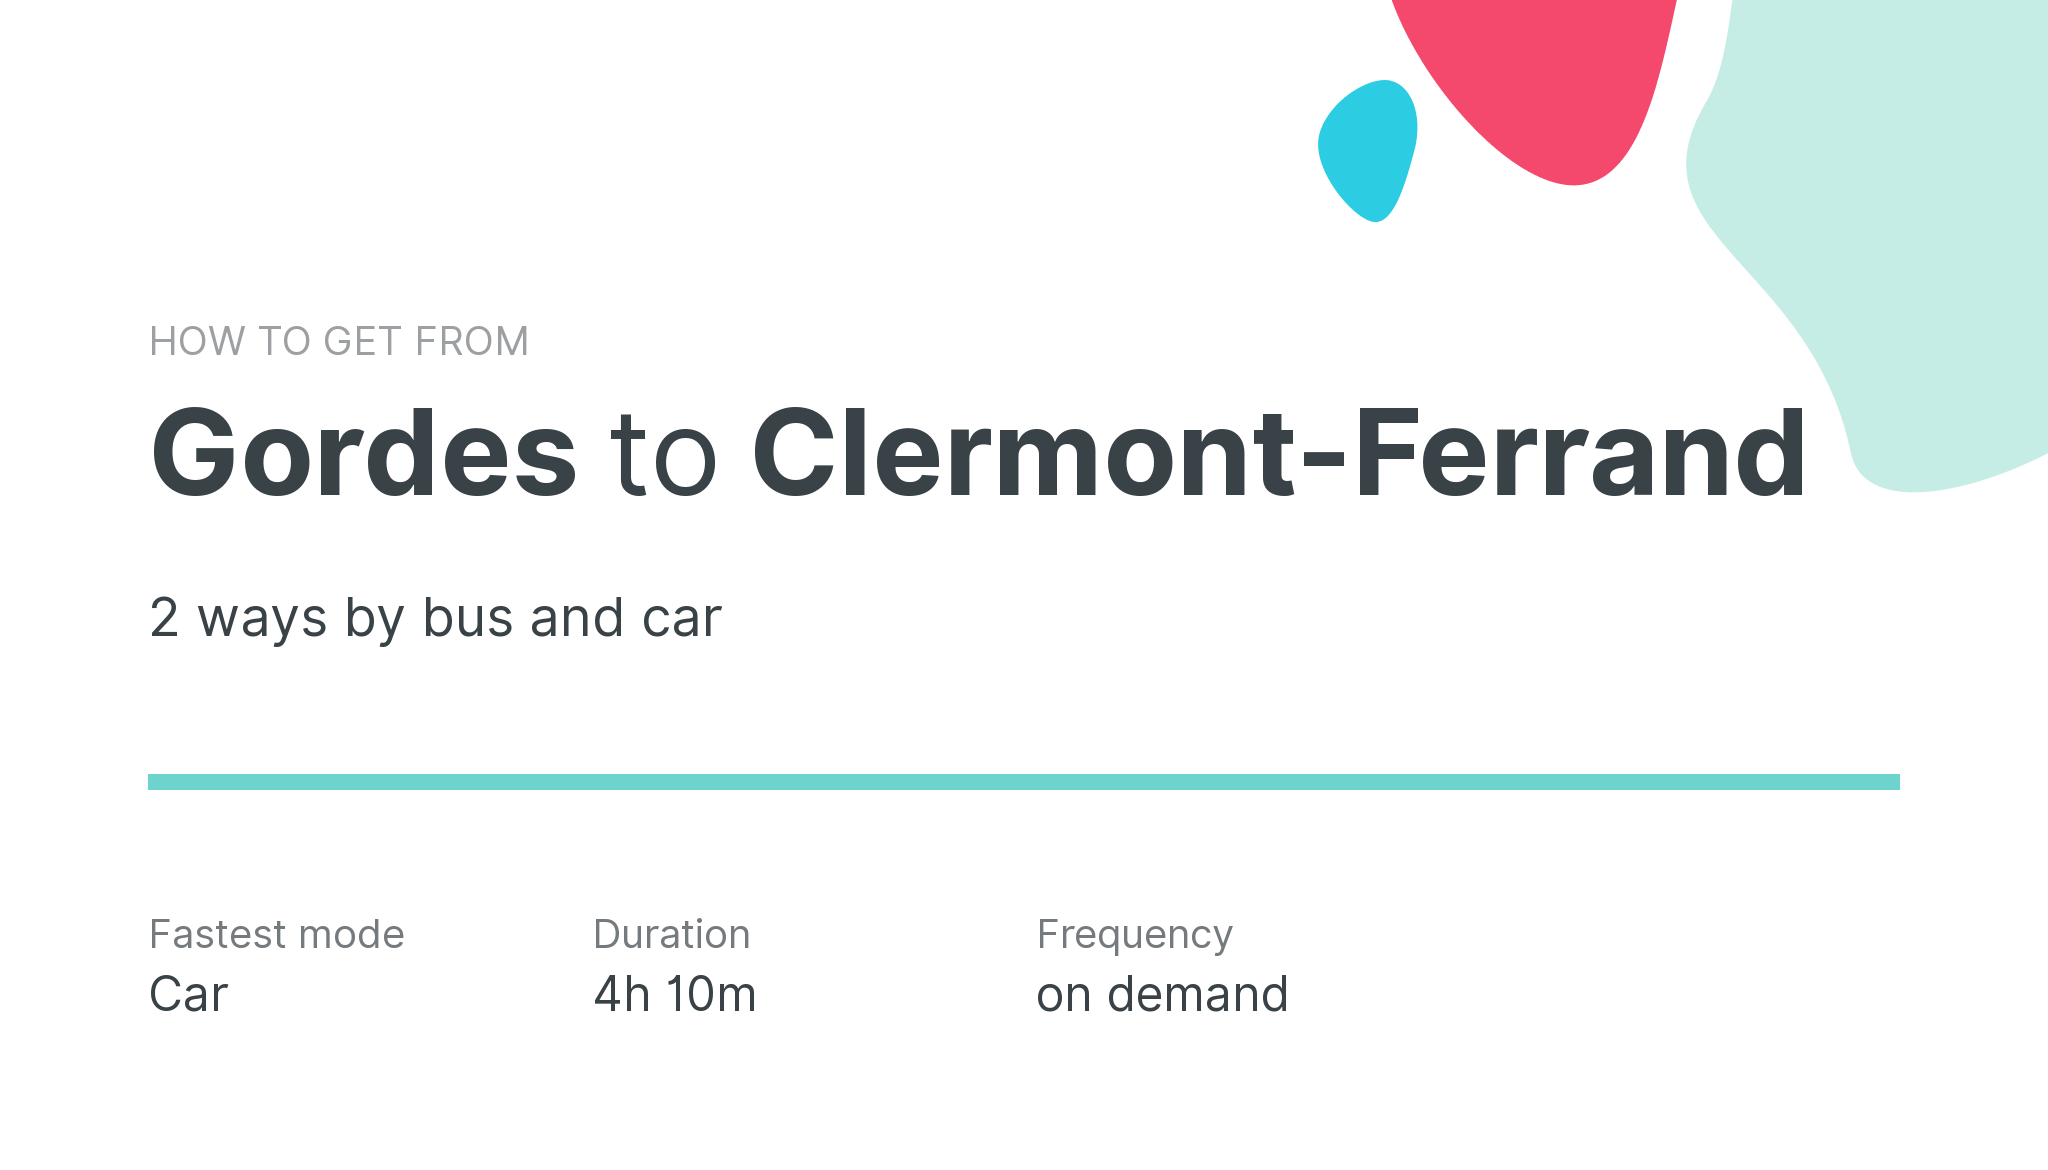 How do I get from Gordes to Clermont-Ferrand